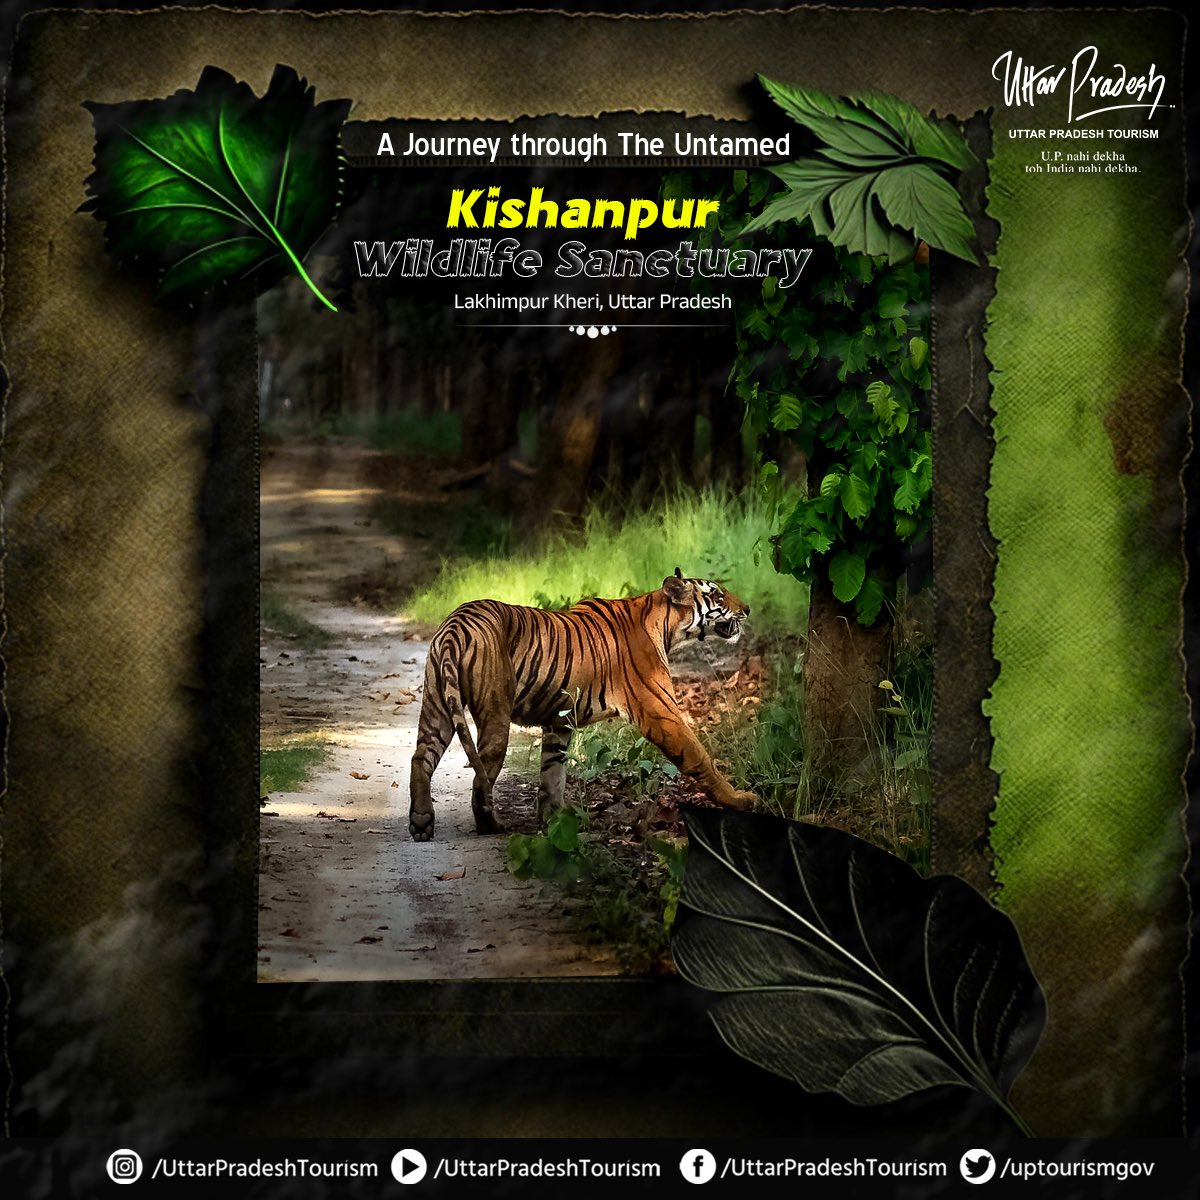 Embark on a journey through the untamed realms of #KishanpurWildlifeSanctuary, where nature's whimsical ways enchant & enthrall. Encounter the majestic strides of #wildlife, immersing yourself in nature's bounty. It's not just a journey; it's a royal escapade #IntoTheWild.